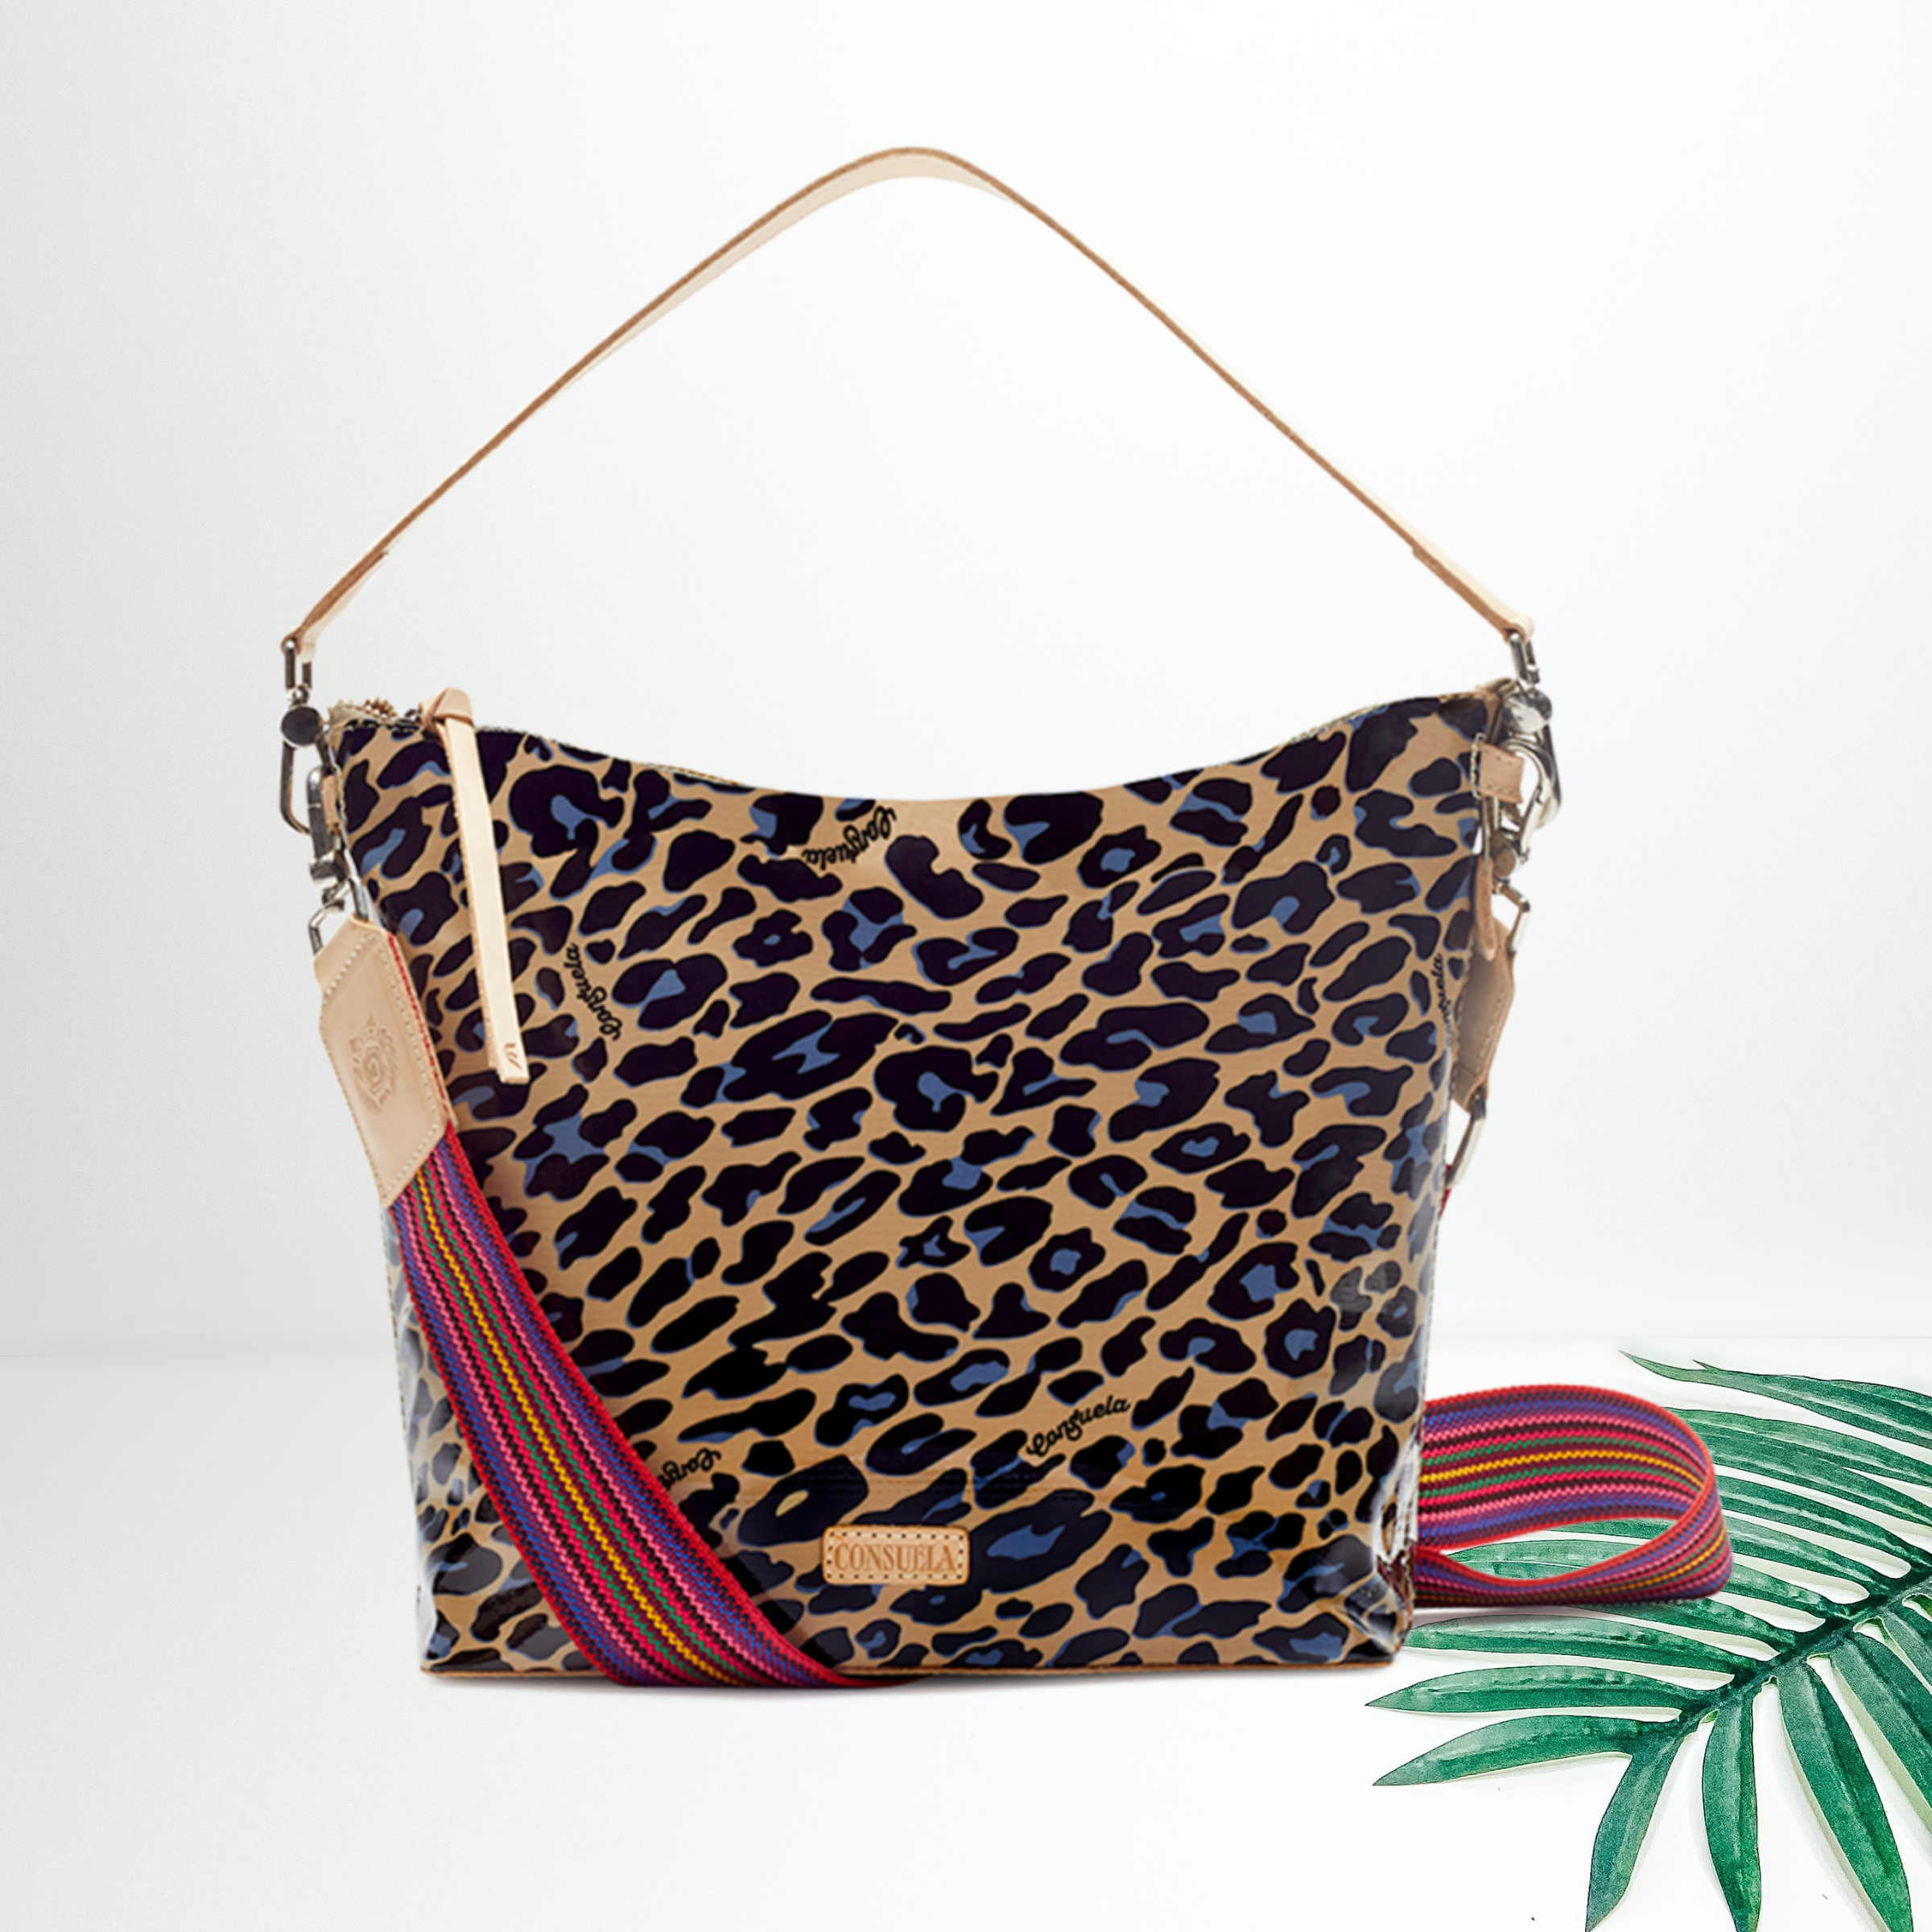 Centered in the picture is a medium sized bag in a leopard print with hints of blue. To the right of the bag is a palm leaf, all on a white background. 